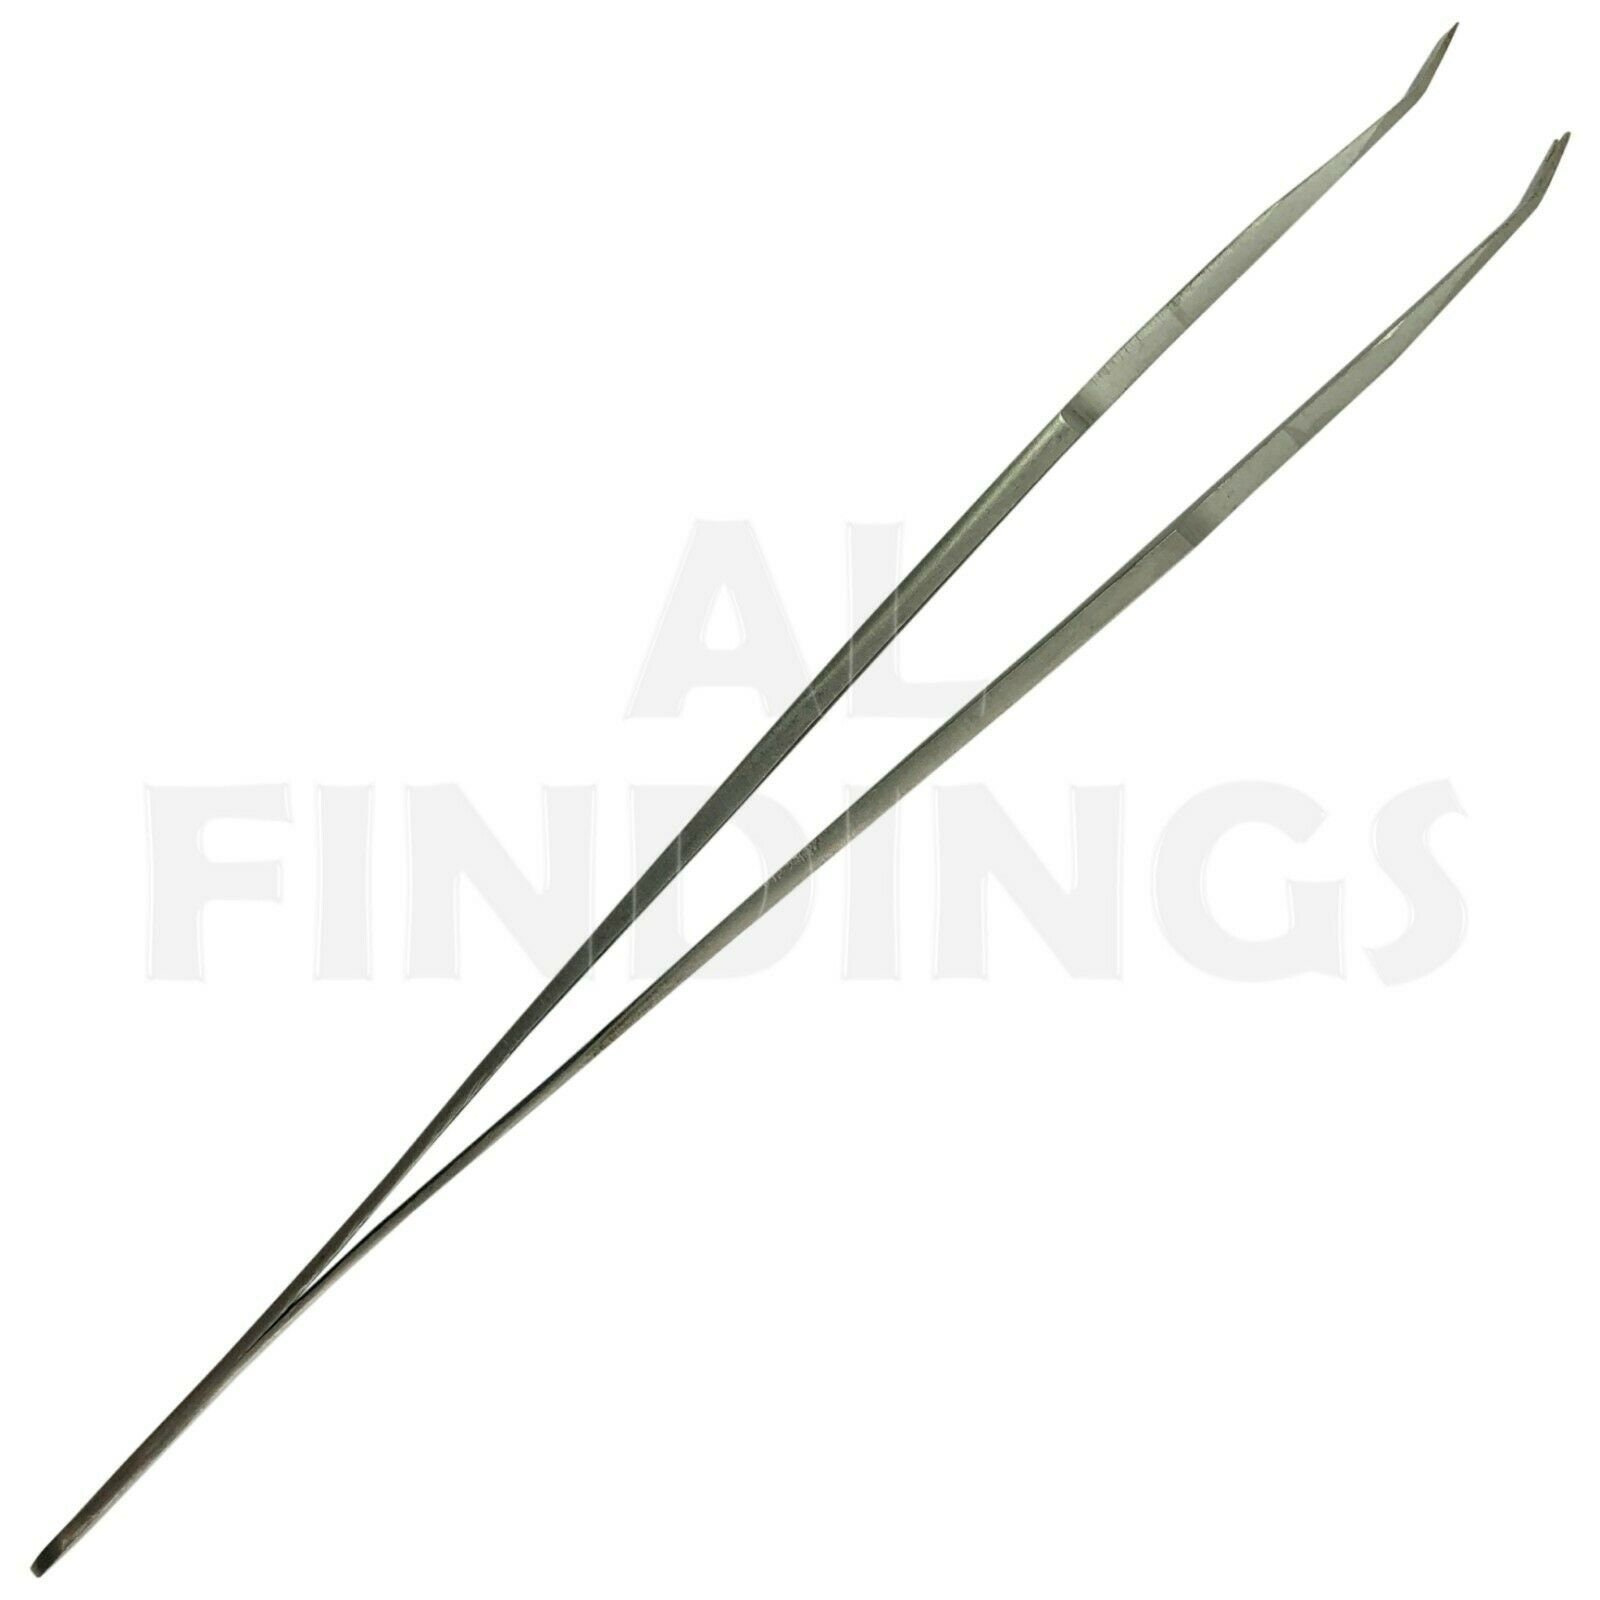 TWEEZERS FOR HOLDING SCREWS assembly watchmakers repairs servicing screw tool 